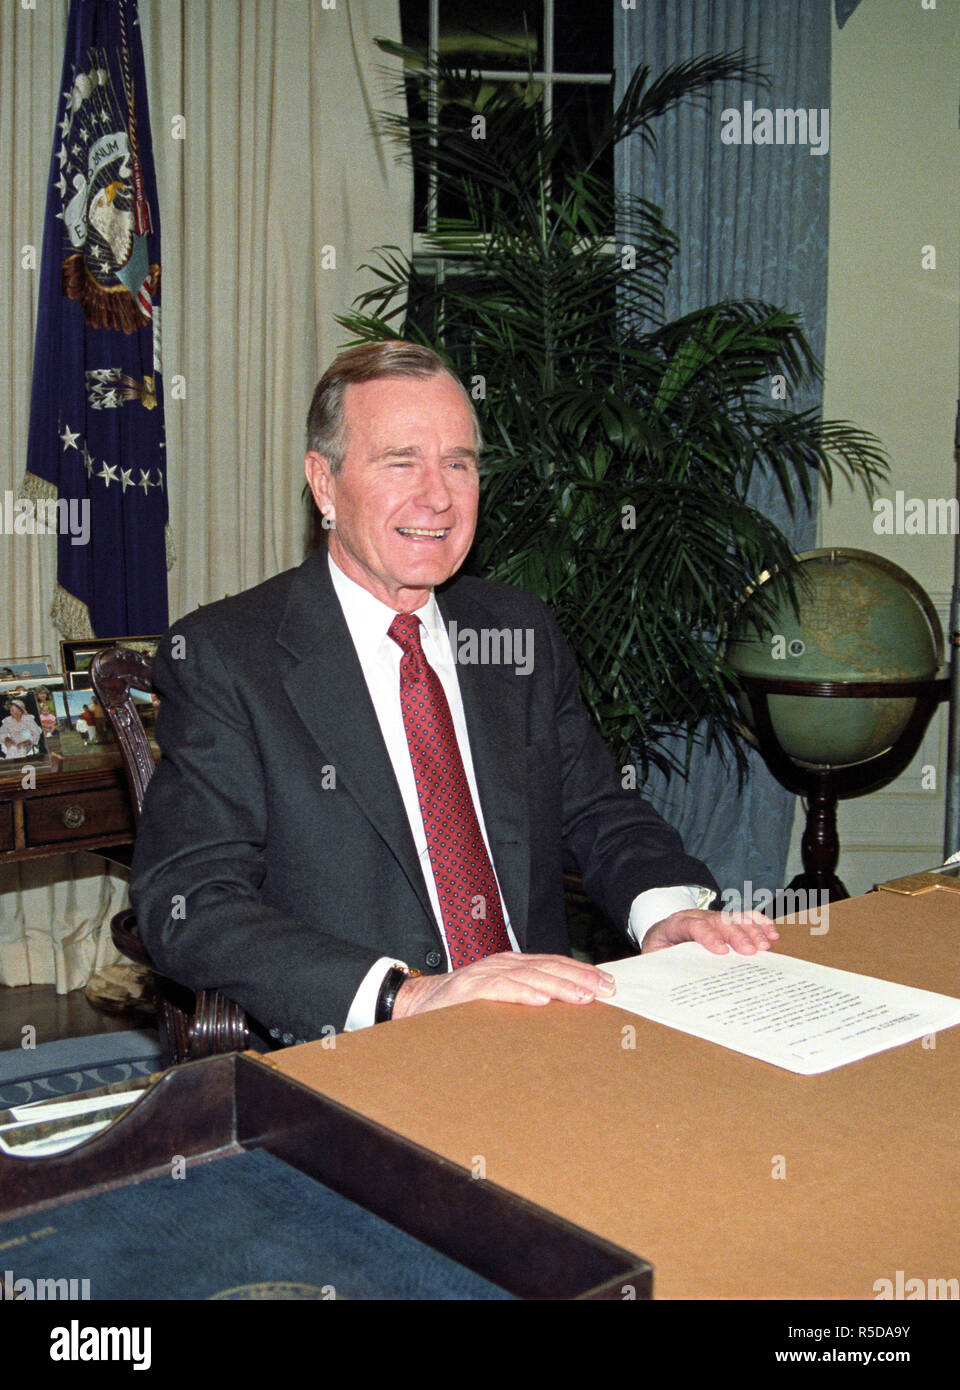 ***FILE PHOTO*** George H.W. Bush Has Passed Away United States President George H.W. Bush poses for photographers after delivering an address to the nation from the Oval Office of the White House in Washington, DC on Christmas Day, December 25, 1991 announcing the resignation of President Mikhail Gorbachev as President of the Union of Soviet Socialist Republics, marking the collapse of the Soviet Union and the end of the Cold War. Credit: Arnie Sachs /CNP /MediaPunch Credit: MediaPunch Inc/Alamy Live News Stock Photo